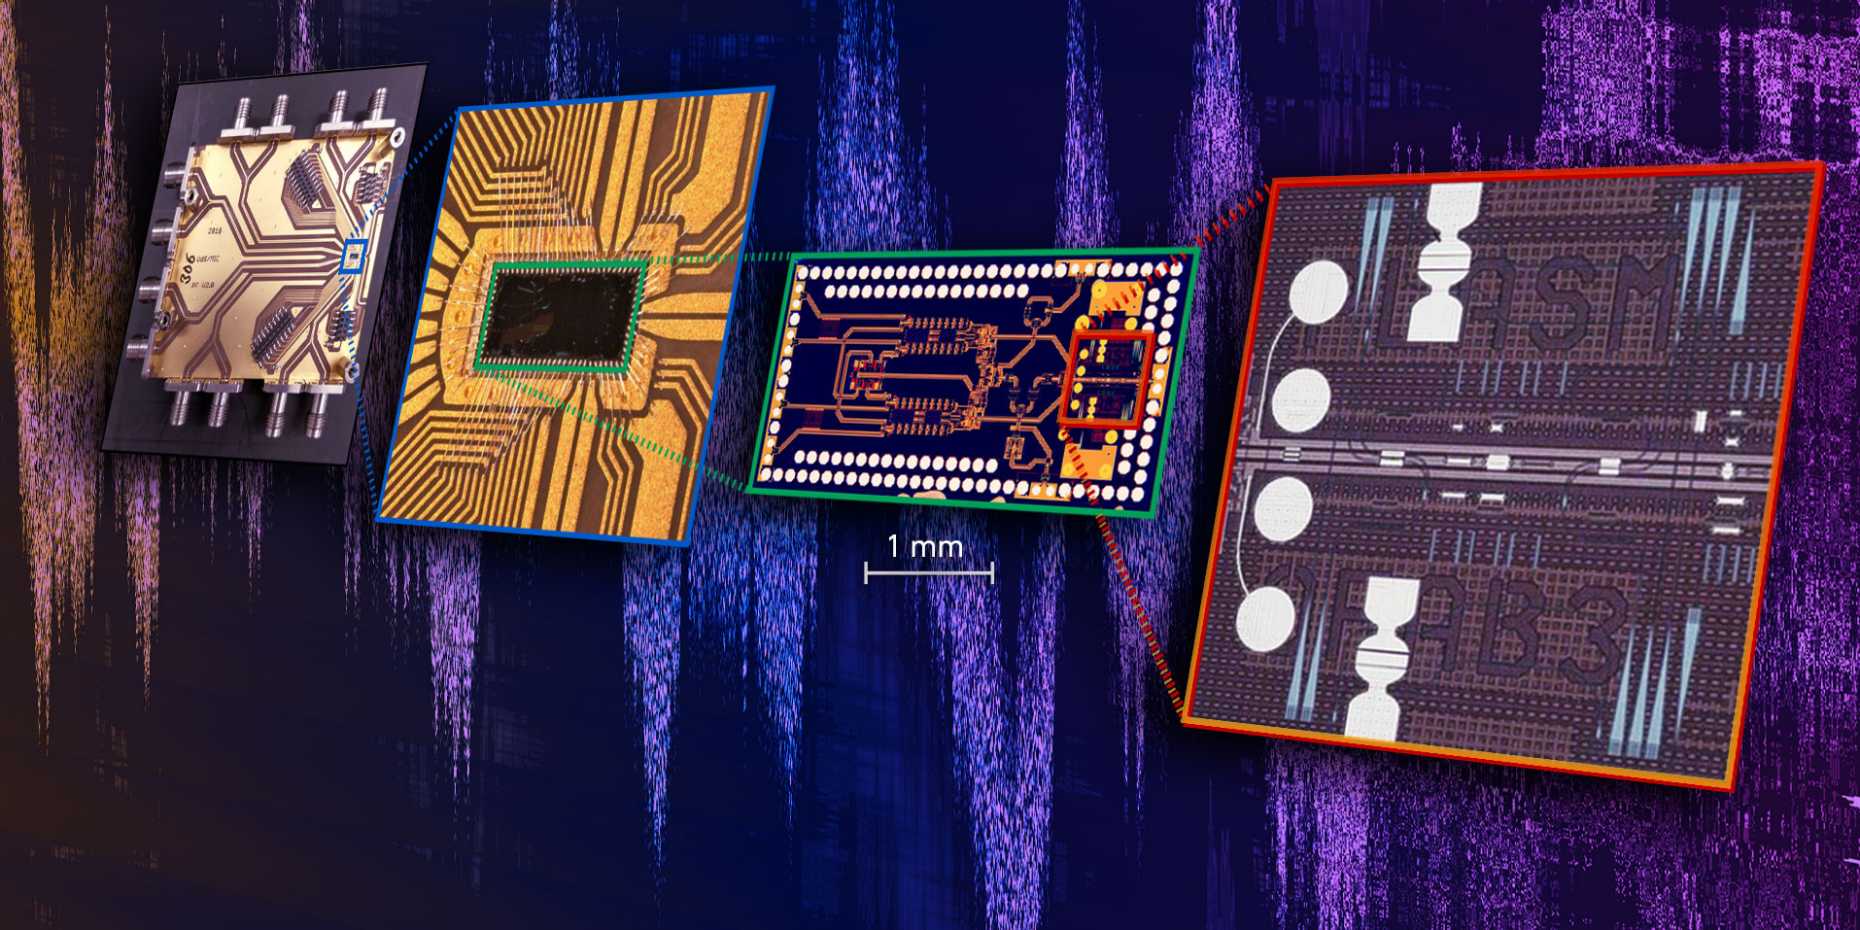 Enlarged view: The new, highly compact chip brings together the fastest electronic and light-based elements in a single component for the first time, paving the way for extremely fast data transmission. (Image: ETH Zurich/Nature Electronics)